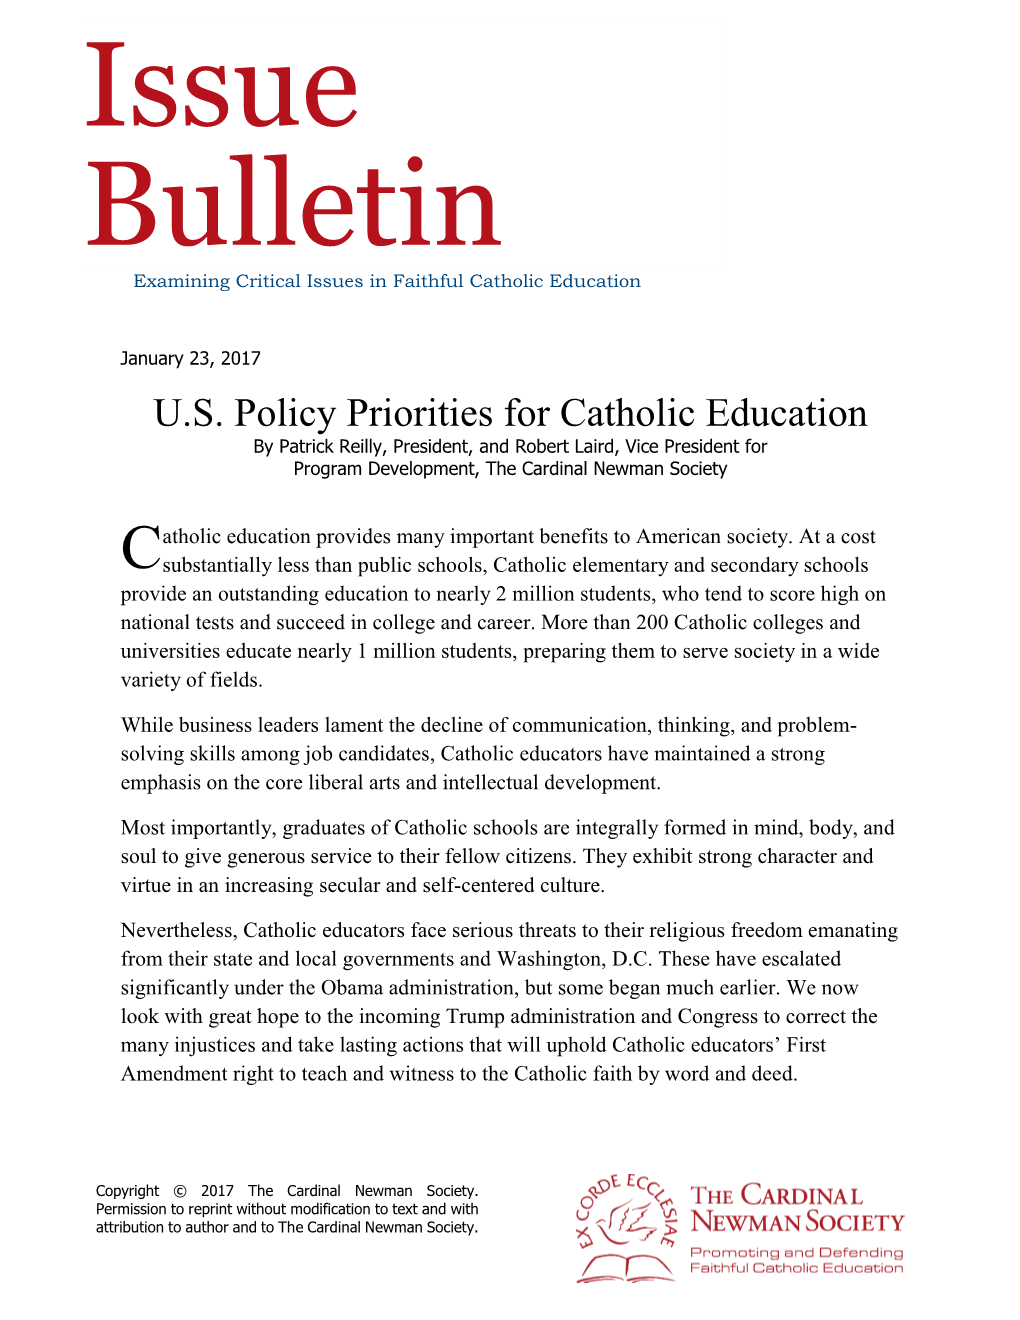 US Policy Priorities for Catholic Education